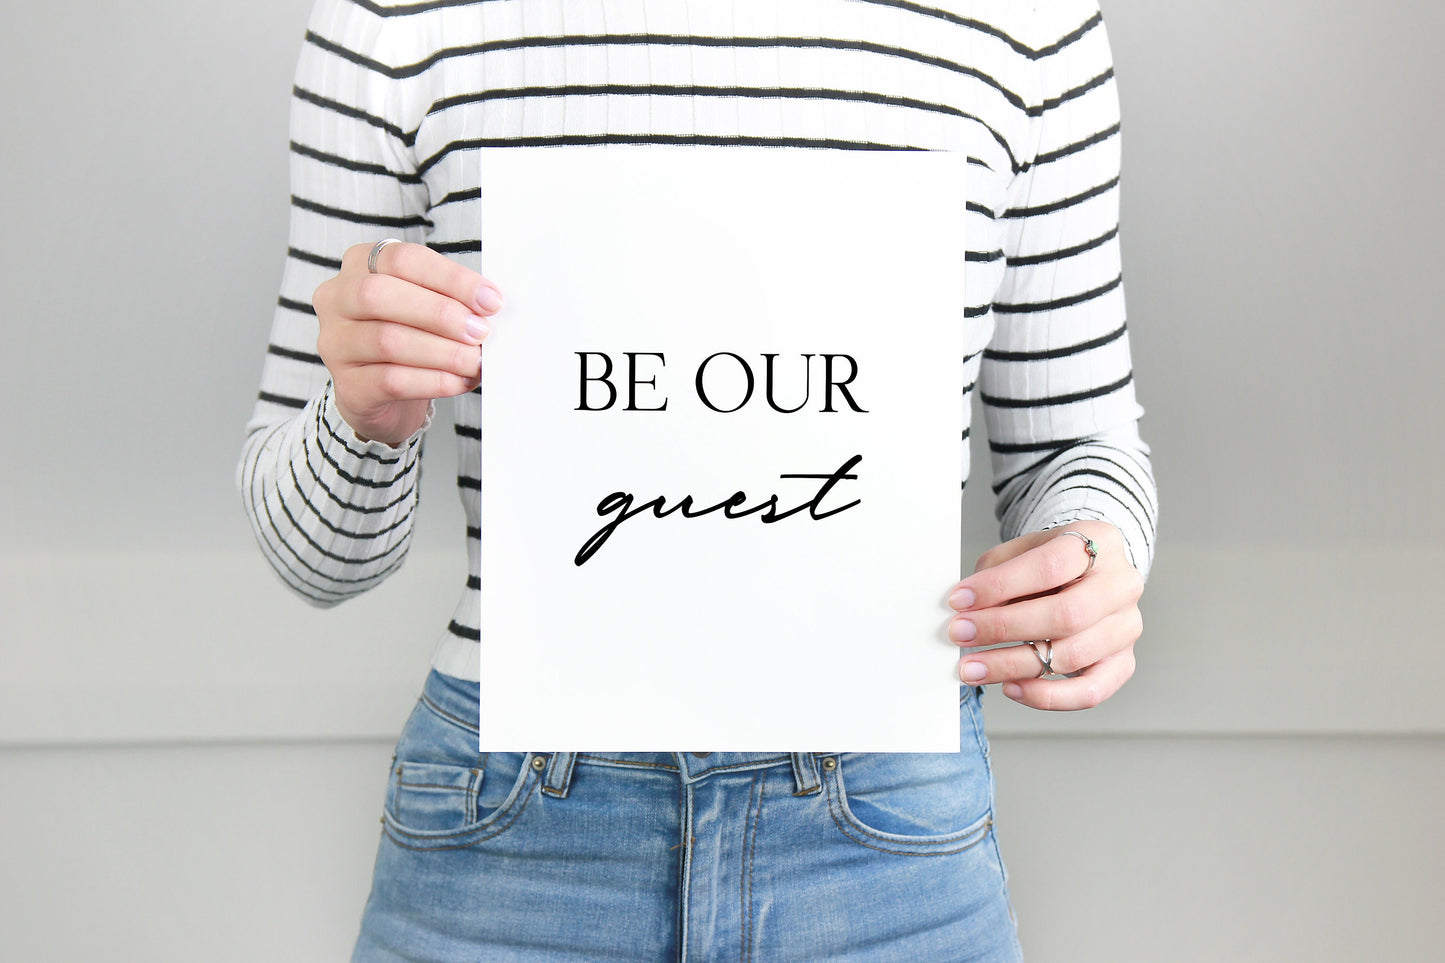 Be Our Guest Print, Home Decor Print, Quote Wall Art, Guest Room Decor,Guest Bedroom Print,Be Our Guest Sign,Wedding Table Decor,Minimalist